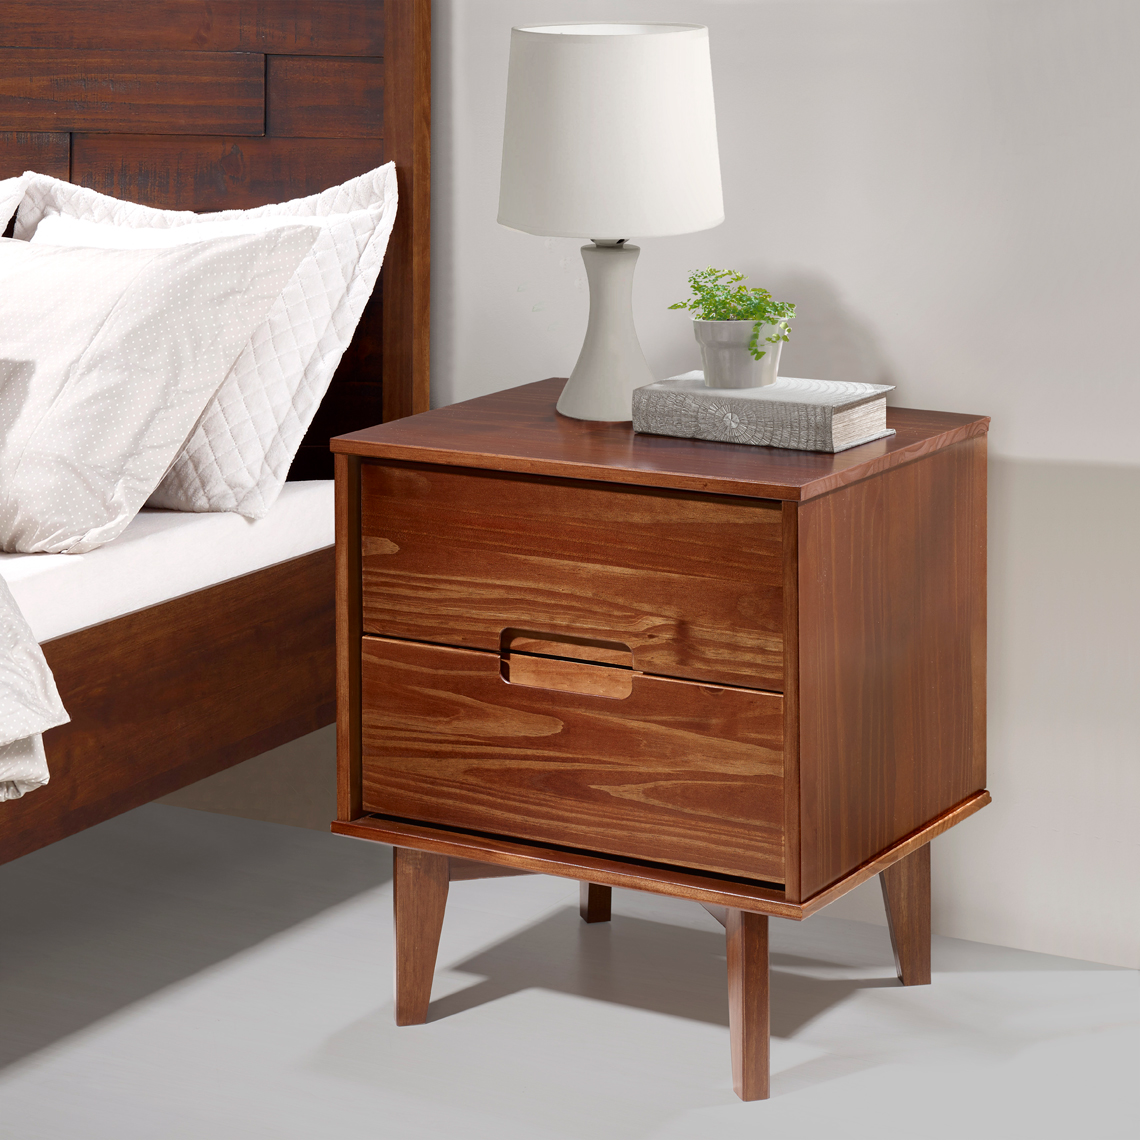 Save On Bedroom Furniture On Walmart Com The Krazy Coupon Lady